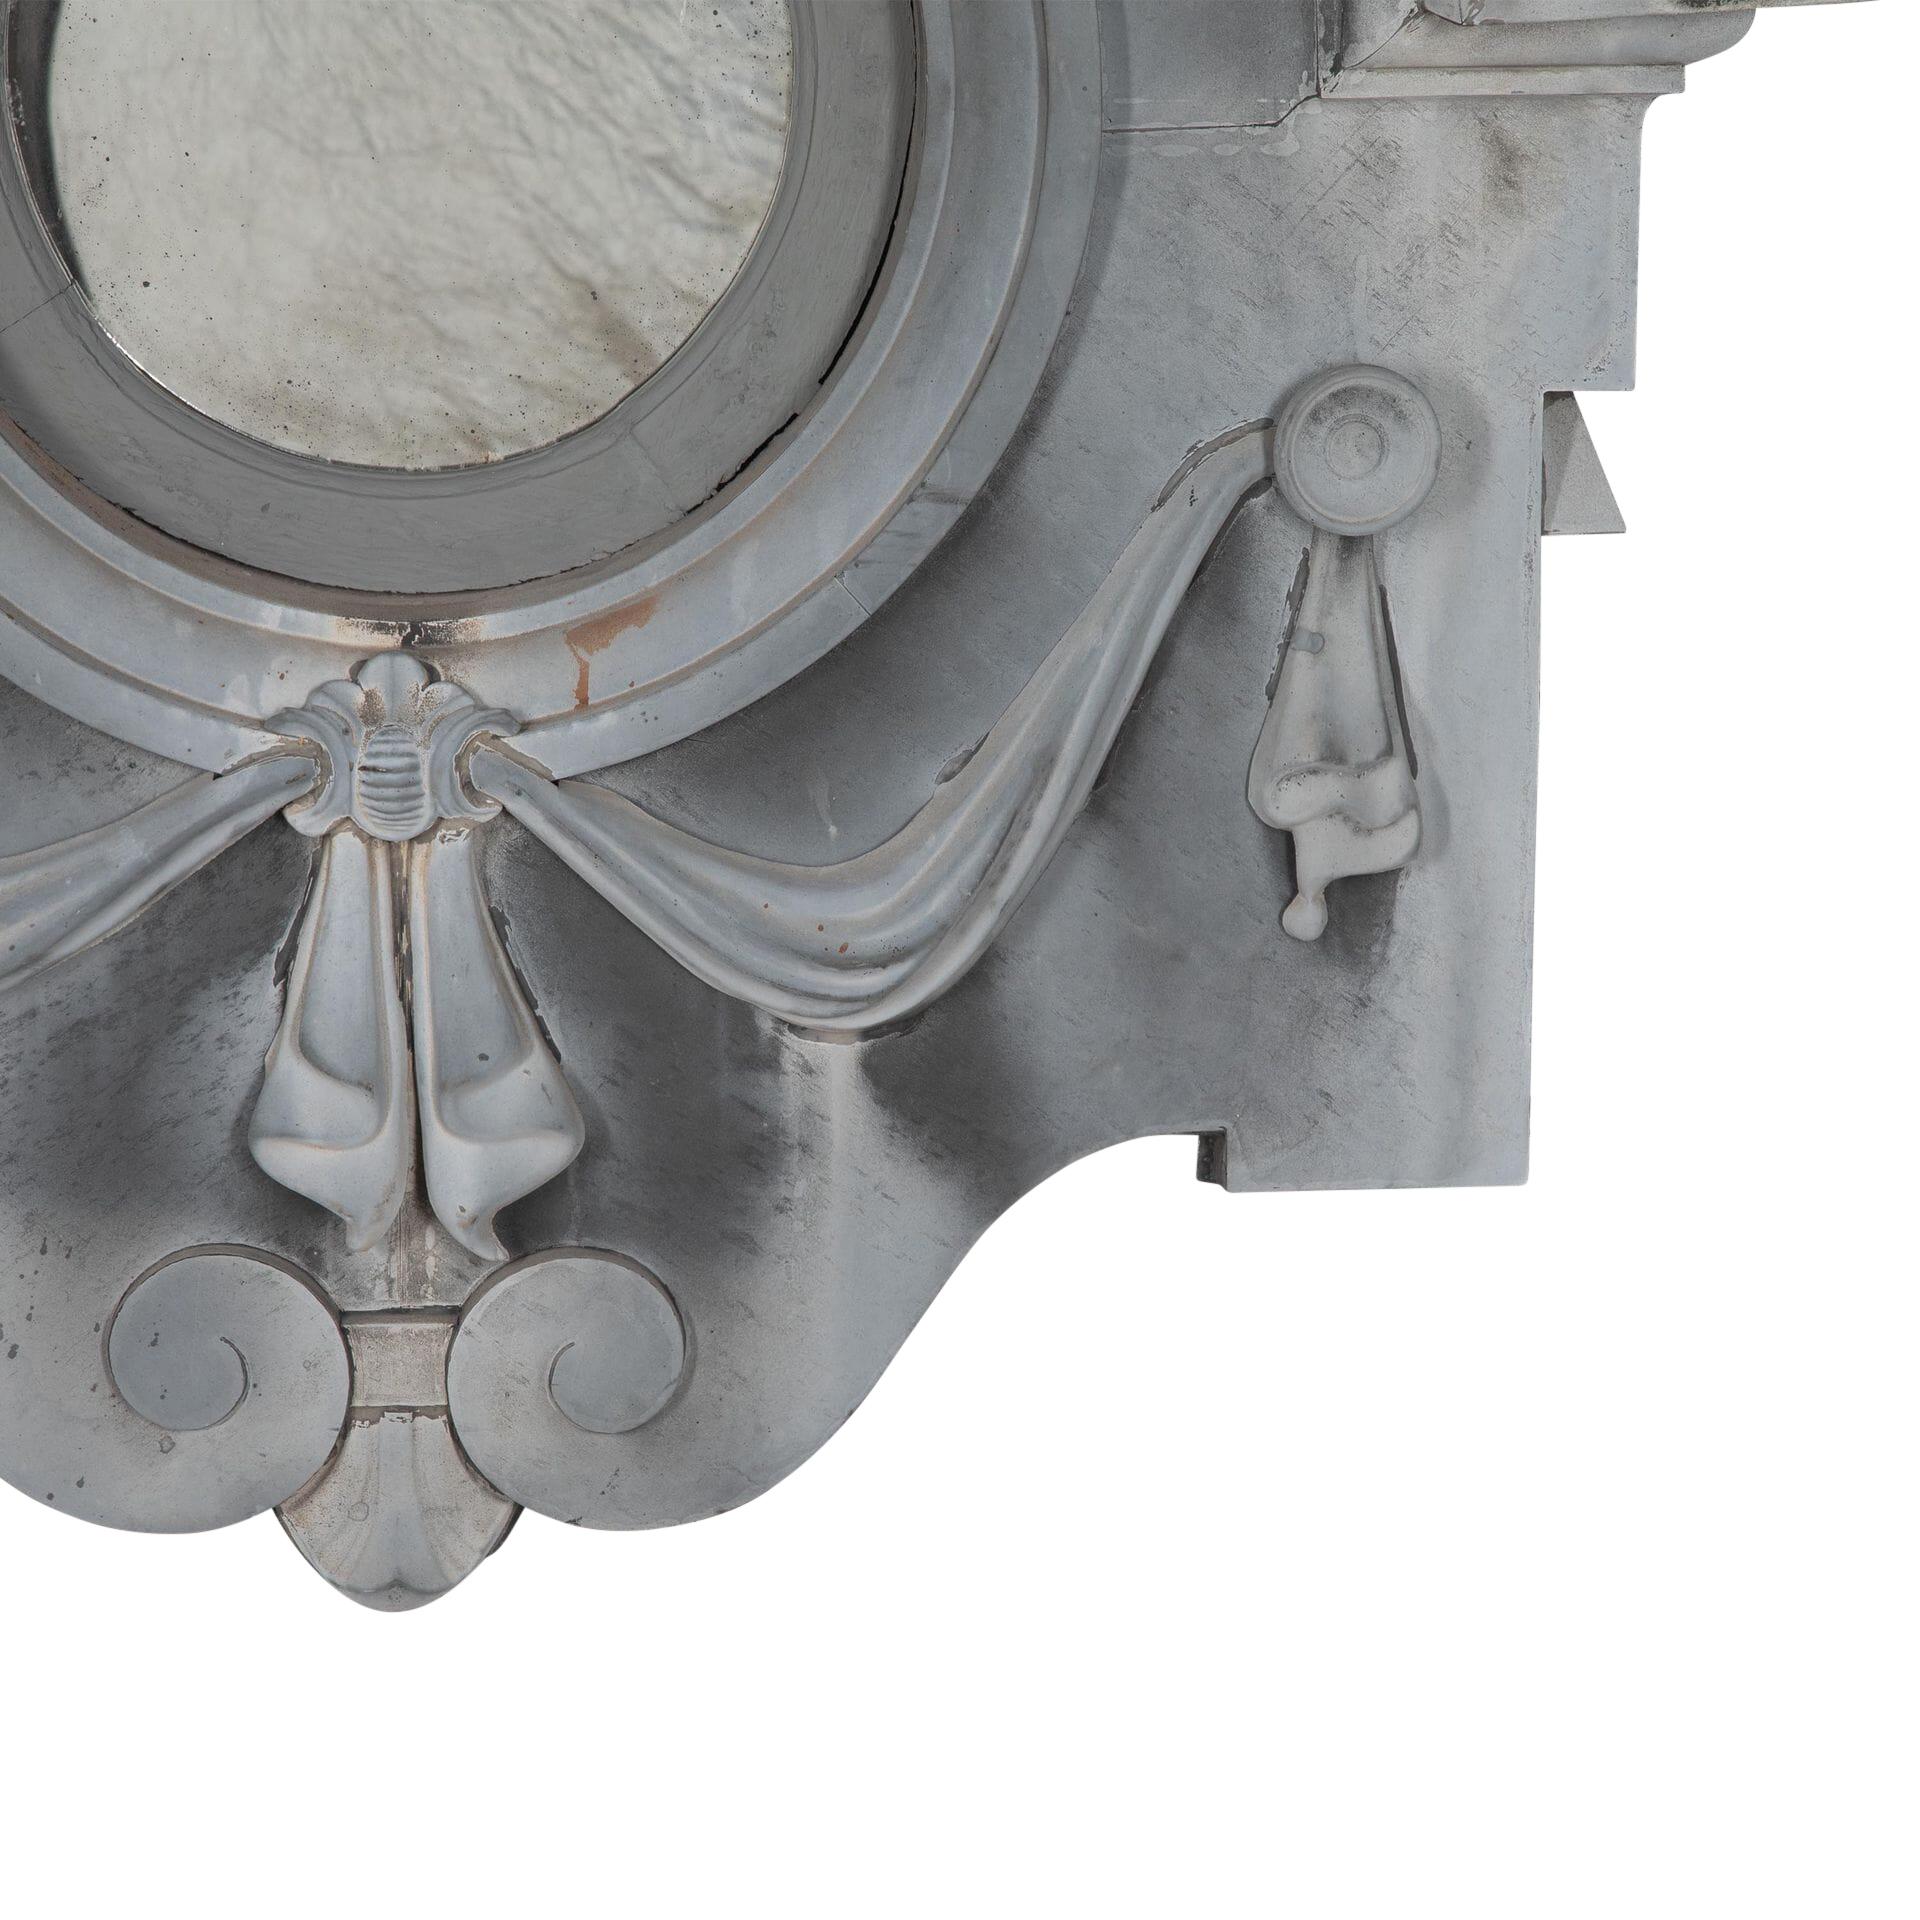 19th century decorative zinc oeil-de-bouef which has been converted into a mirror with a faux mirror plate.